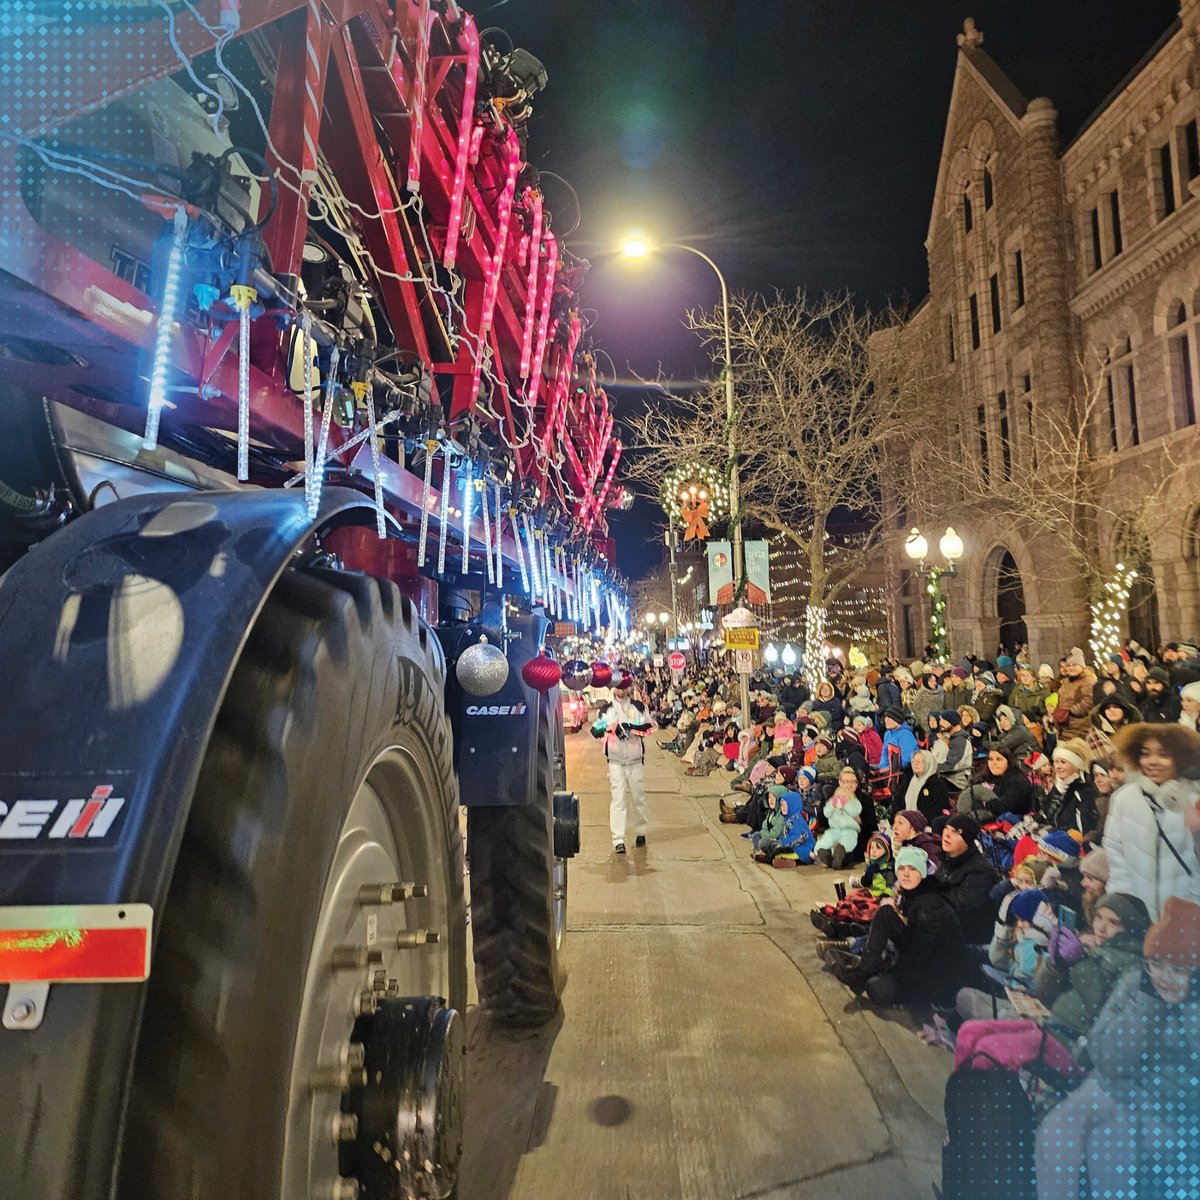 Raven proudly sponsored the DTSF 31st Annual Parade of Lights in Sioux Falls that was held last Friday, November 24, lighting up the city and welcoming in the 2023 holiday season. 🎄 We’re thrilled to have been a part of this magical celebration.